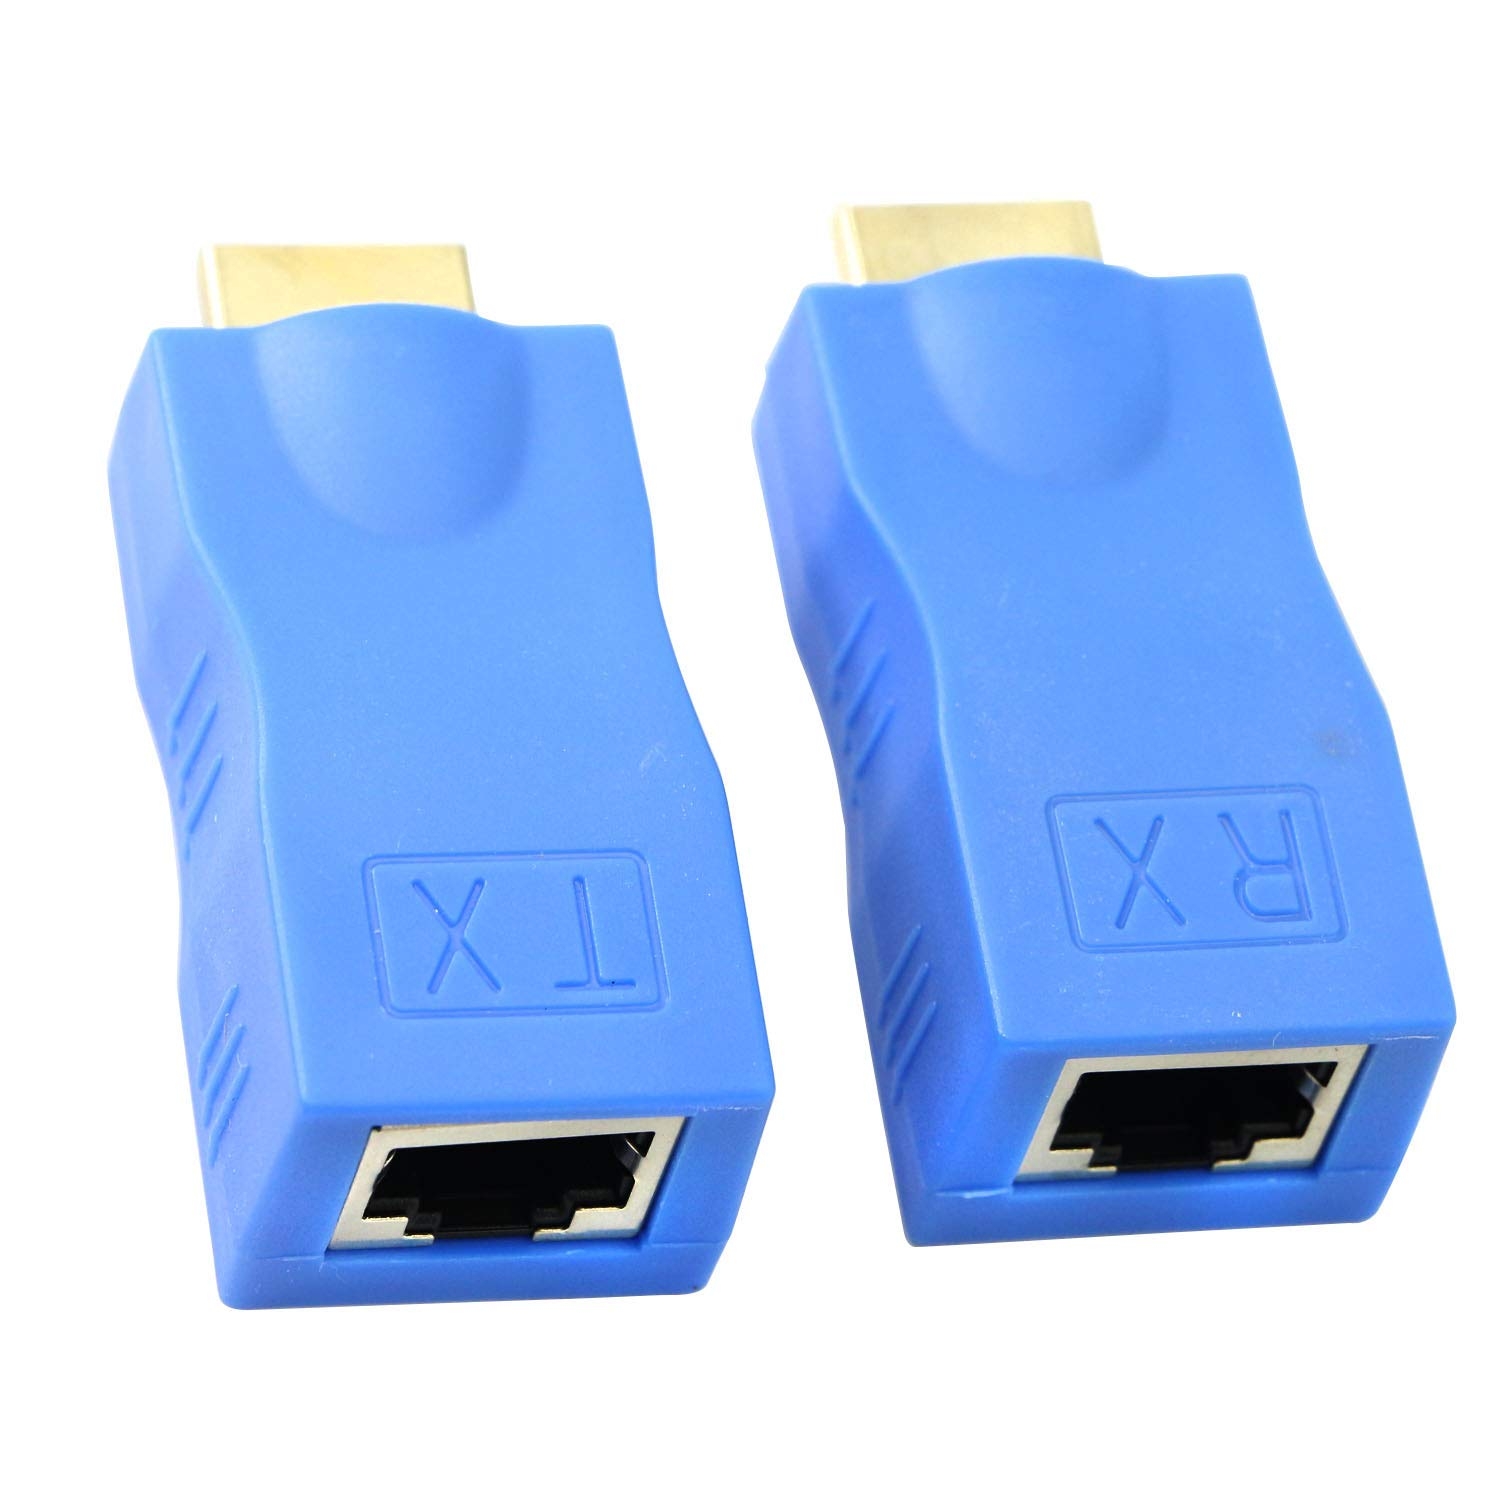 HDMI to RJ45 Network Cable Extender Repeater Over Cat 5e /6 1080p up to 30m Extender (Not Support HDCP)